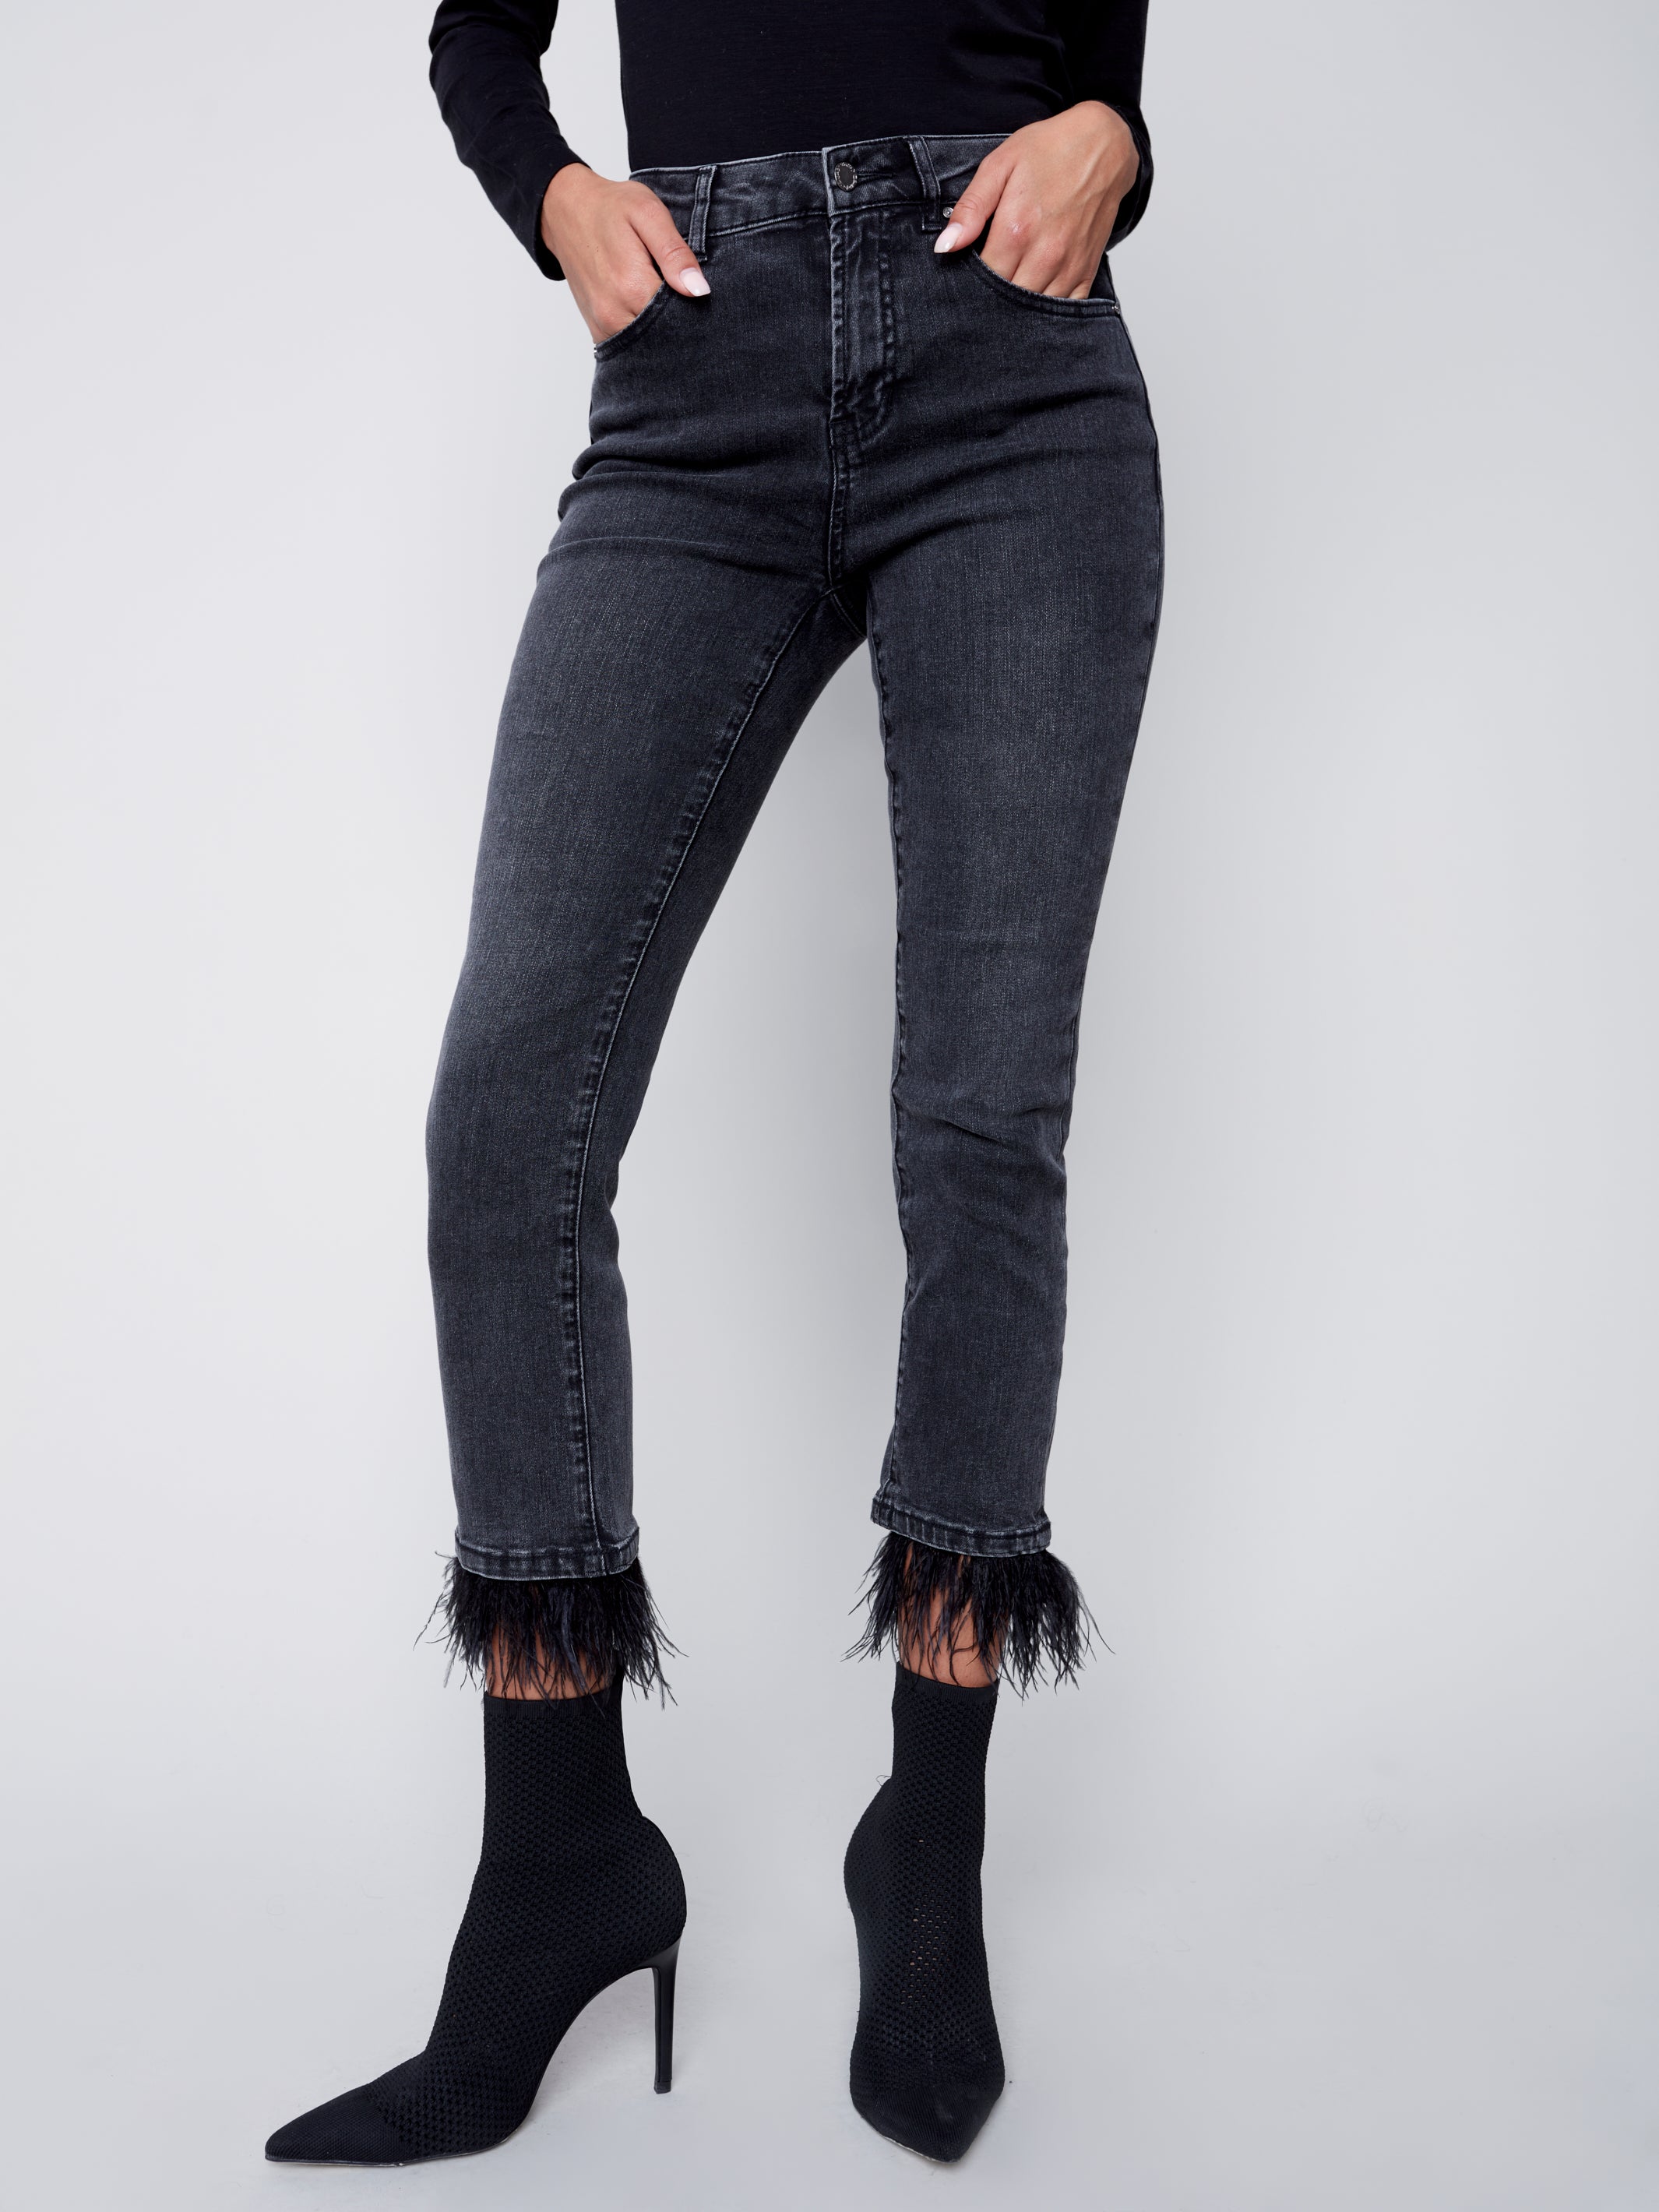 Jeans with Removable Feather Hem by Charlie B